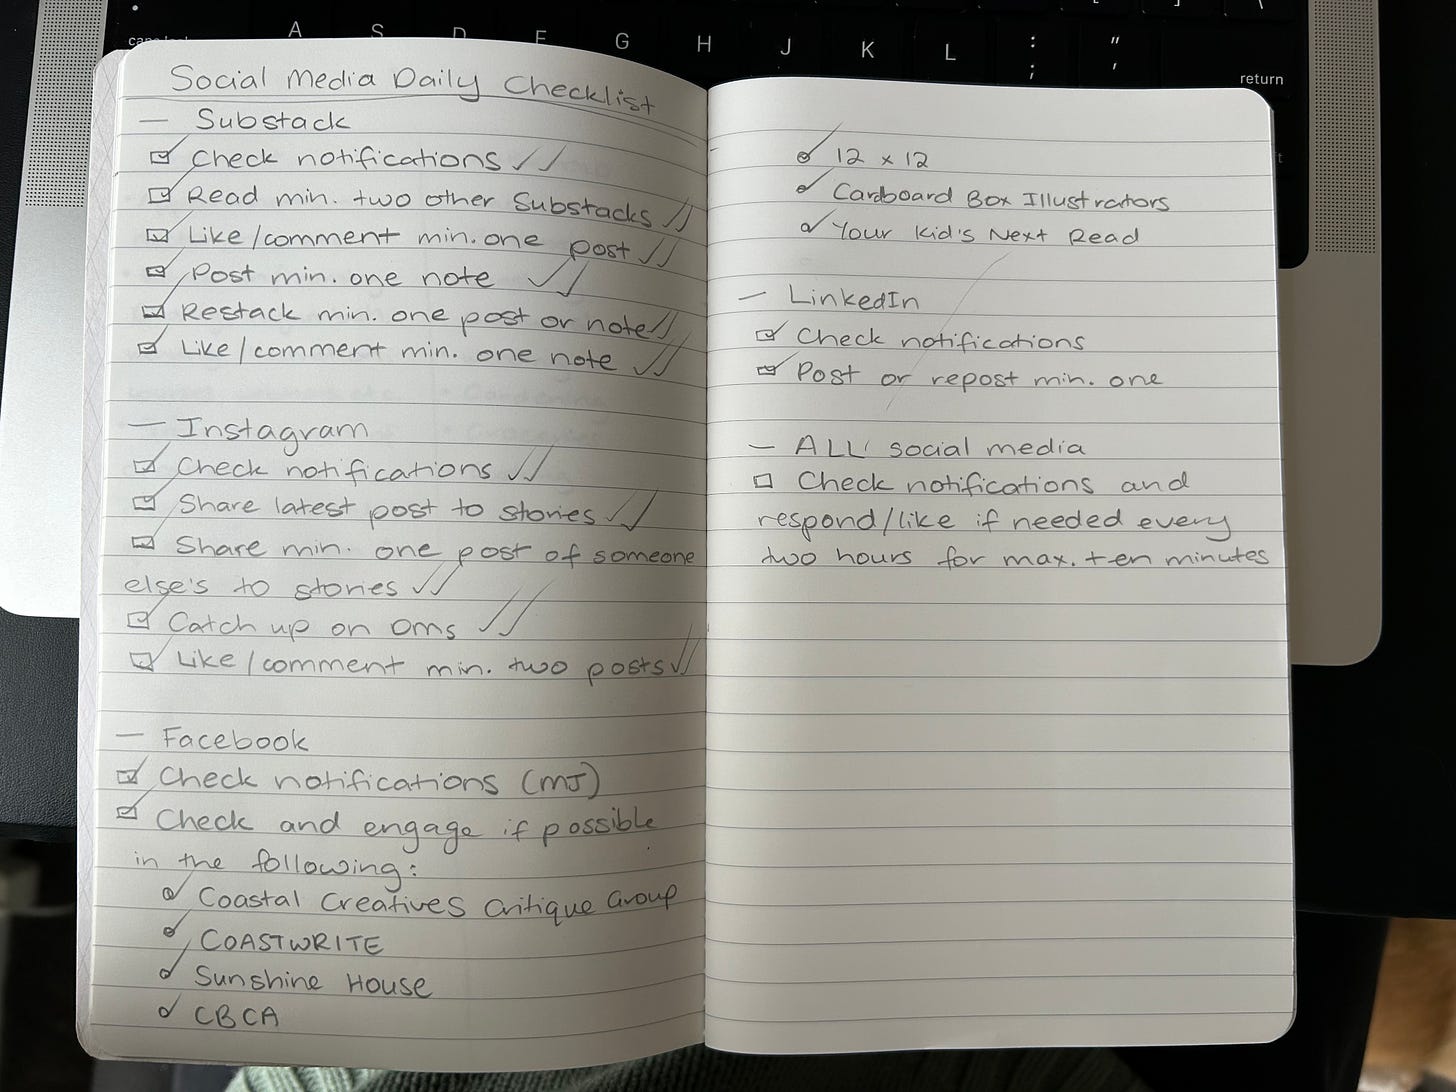 Open notebook showing a page and a half of text including all the social media tasks to check off in a day.